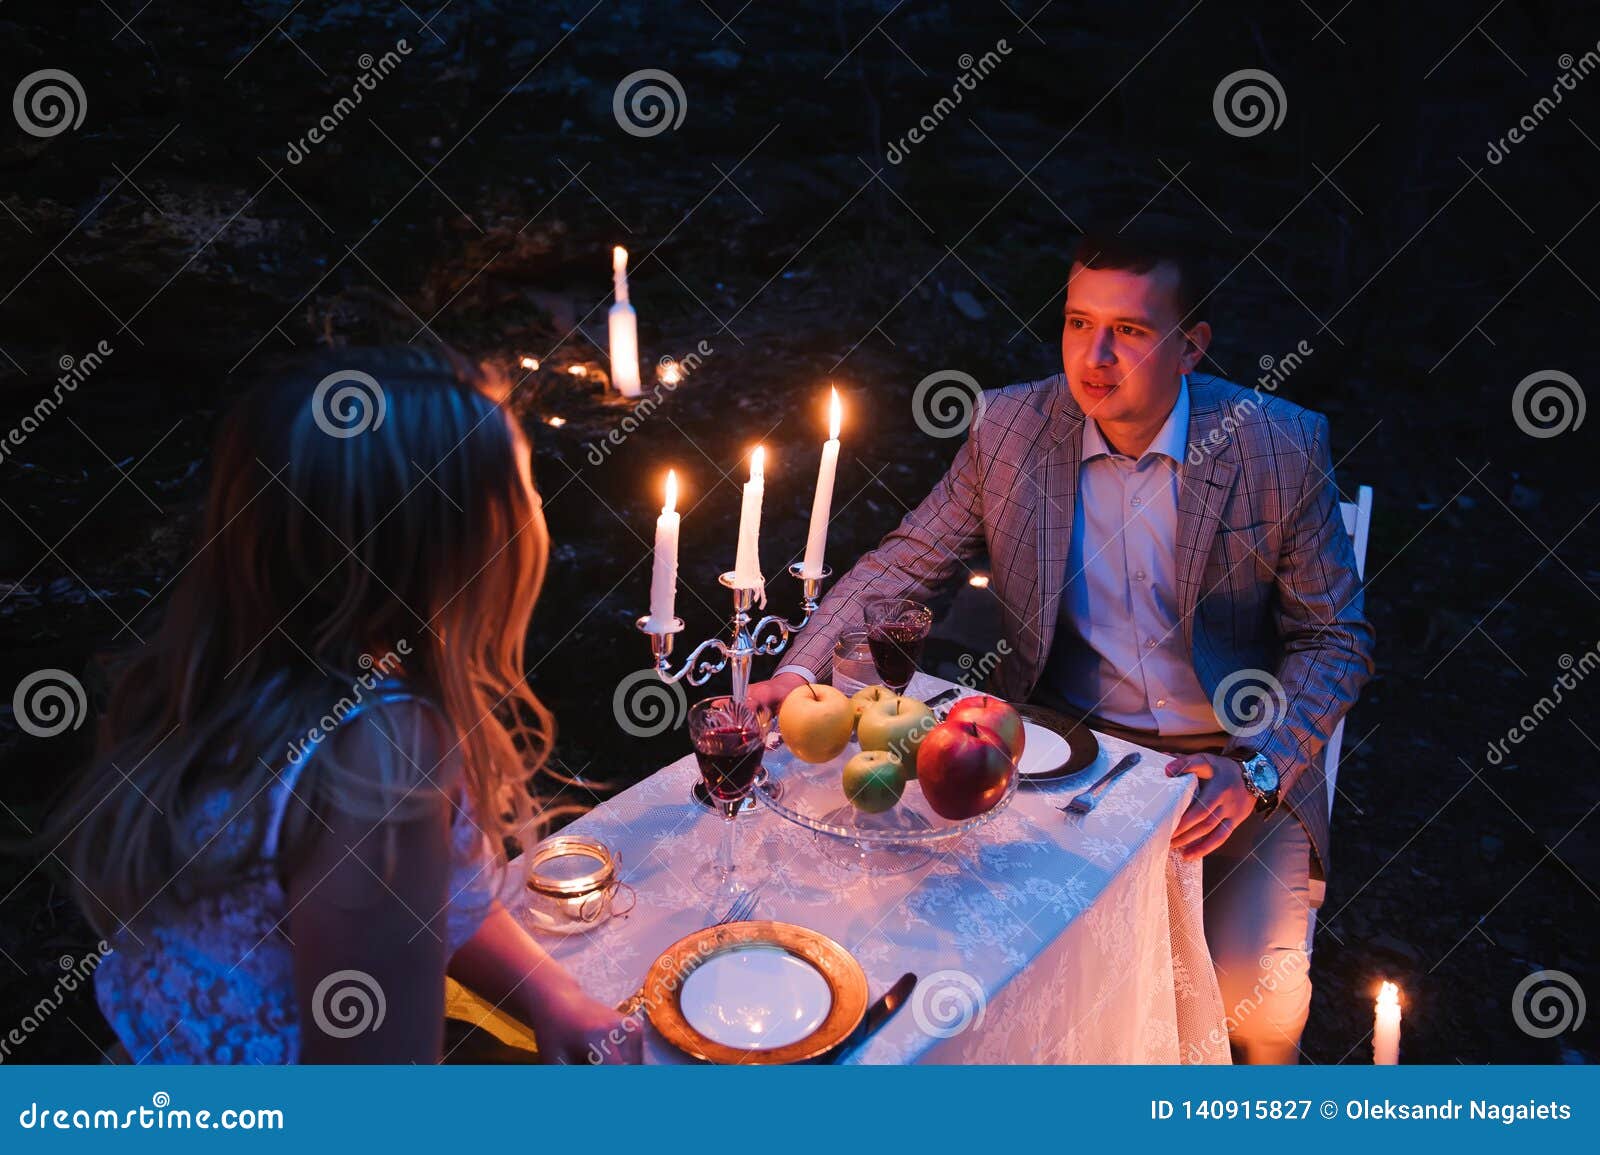 Romantic Couple Together Over Candlelight During Romantic Dinner Outdoors Stock Image Image Of